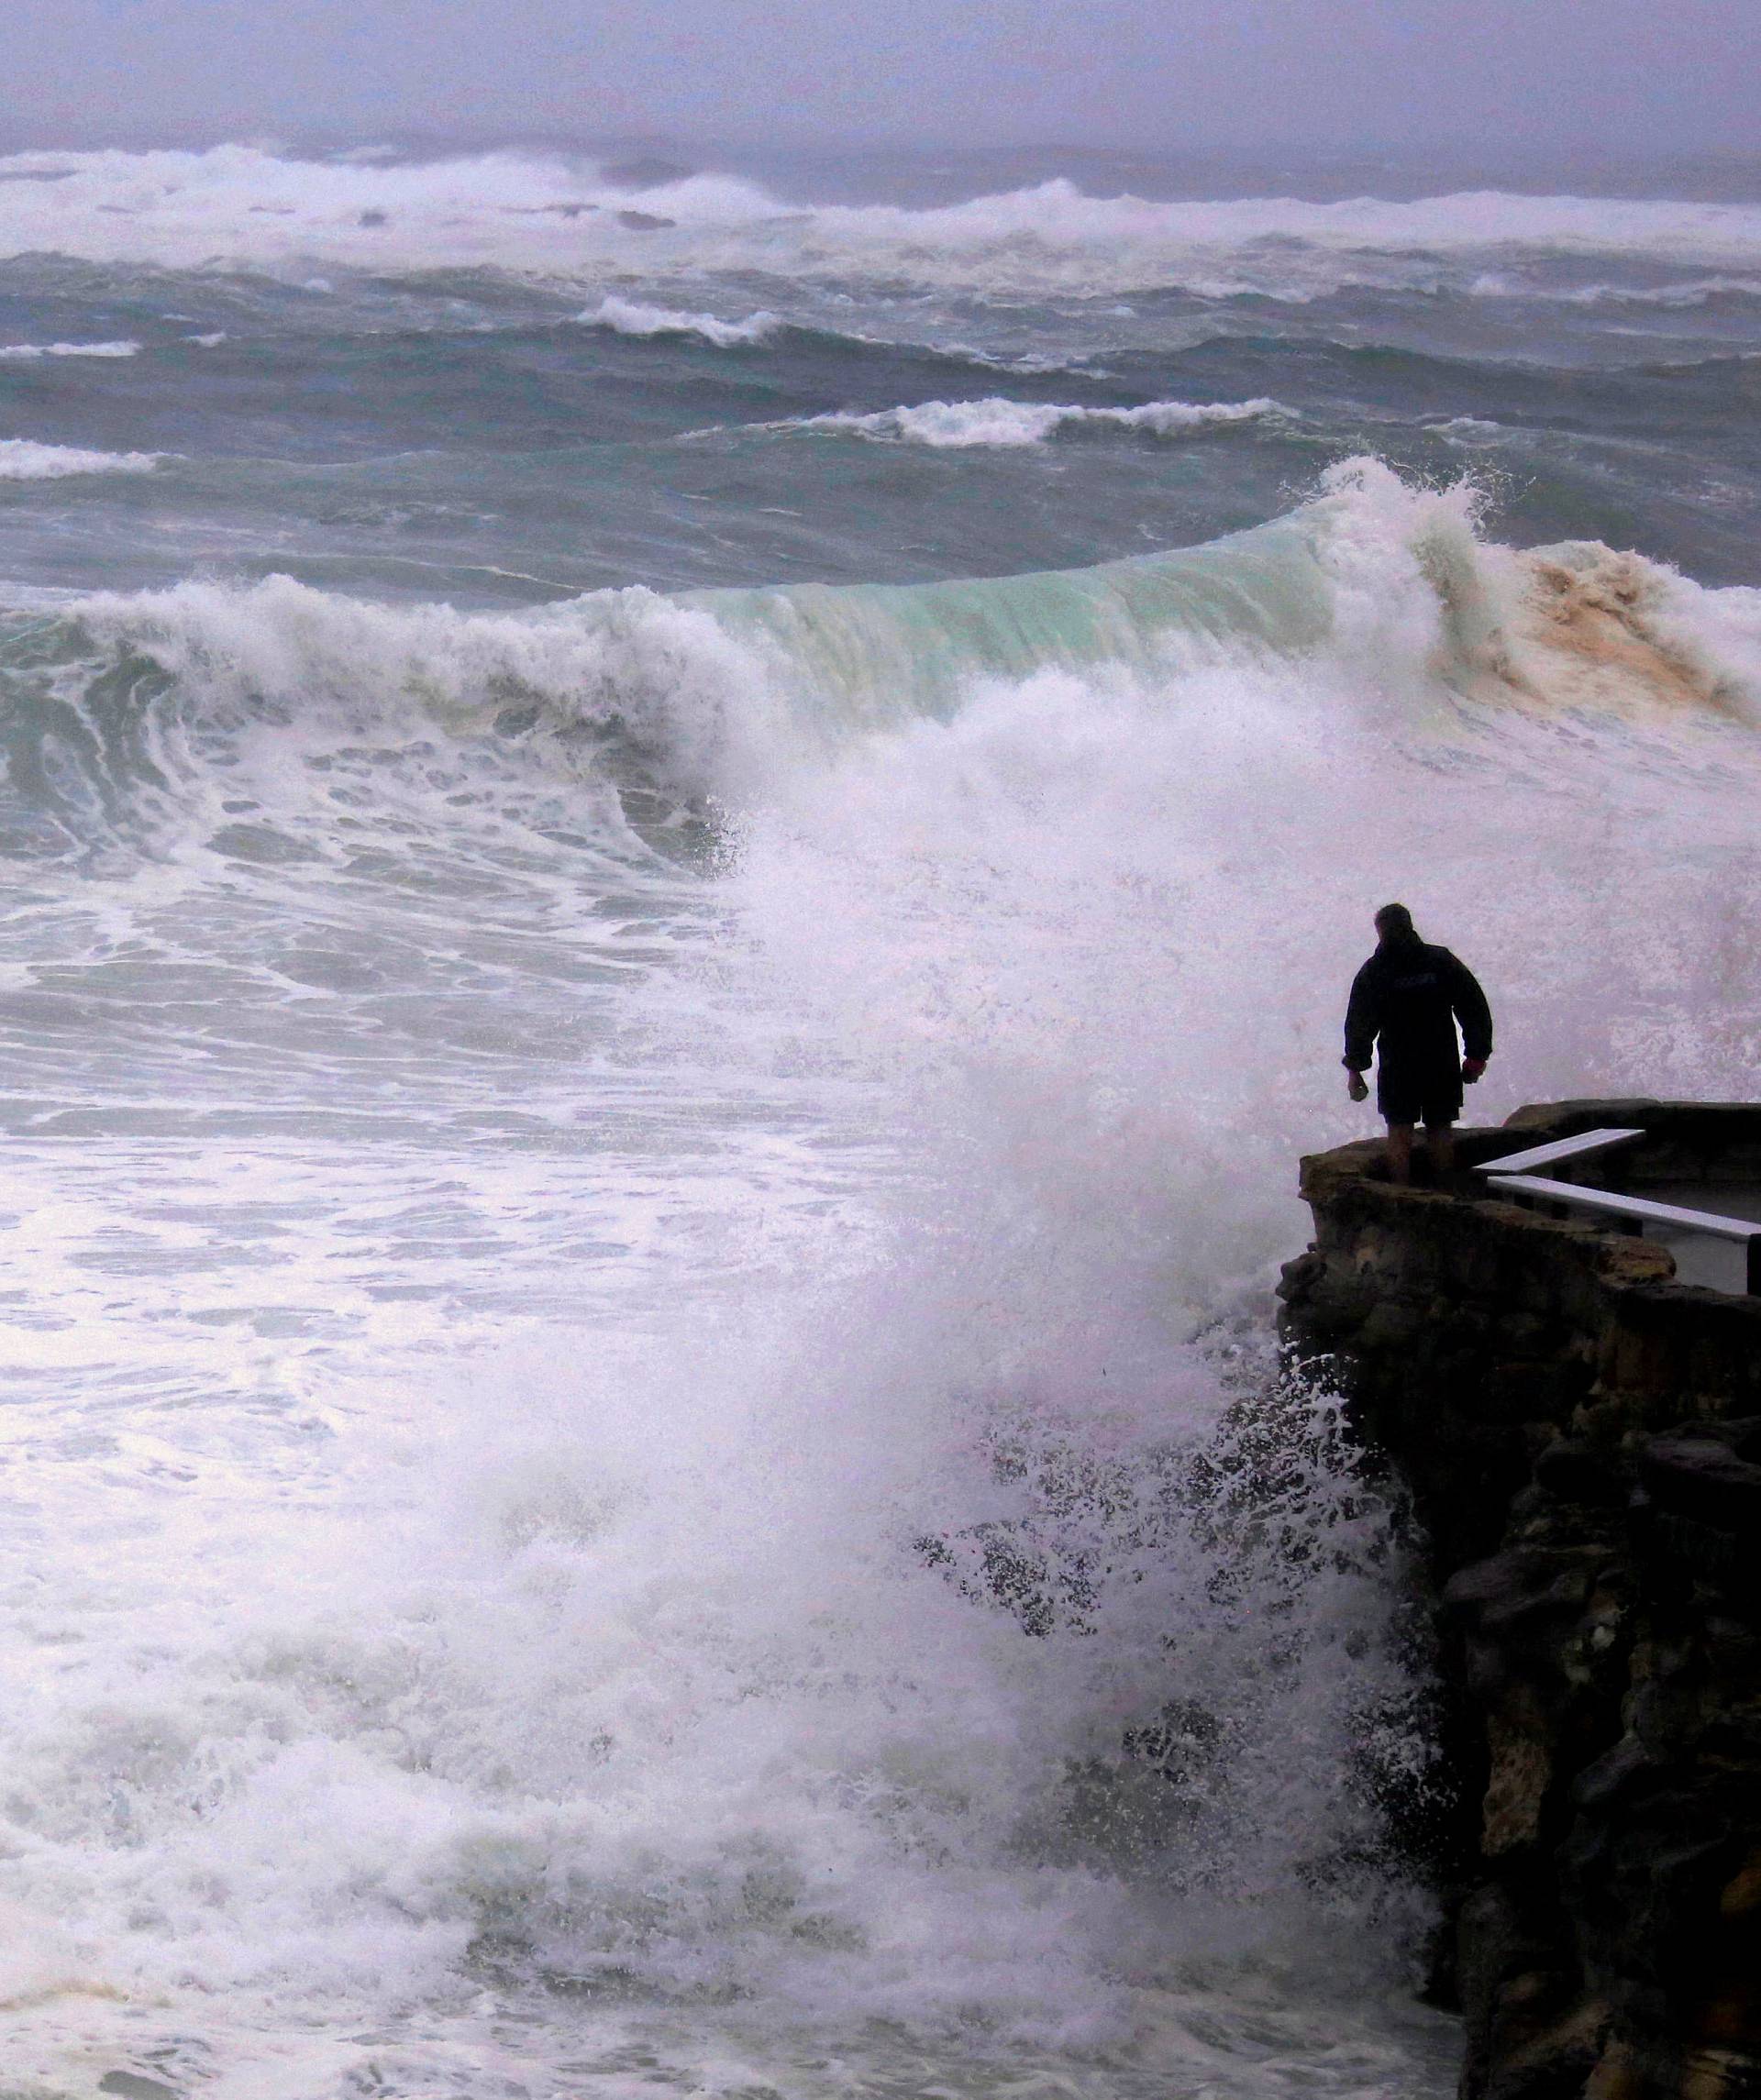 A man looks over cliff as large waves batter coastline near Coogee Beach in Sydney